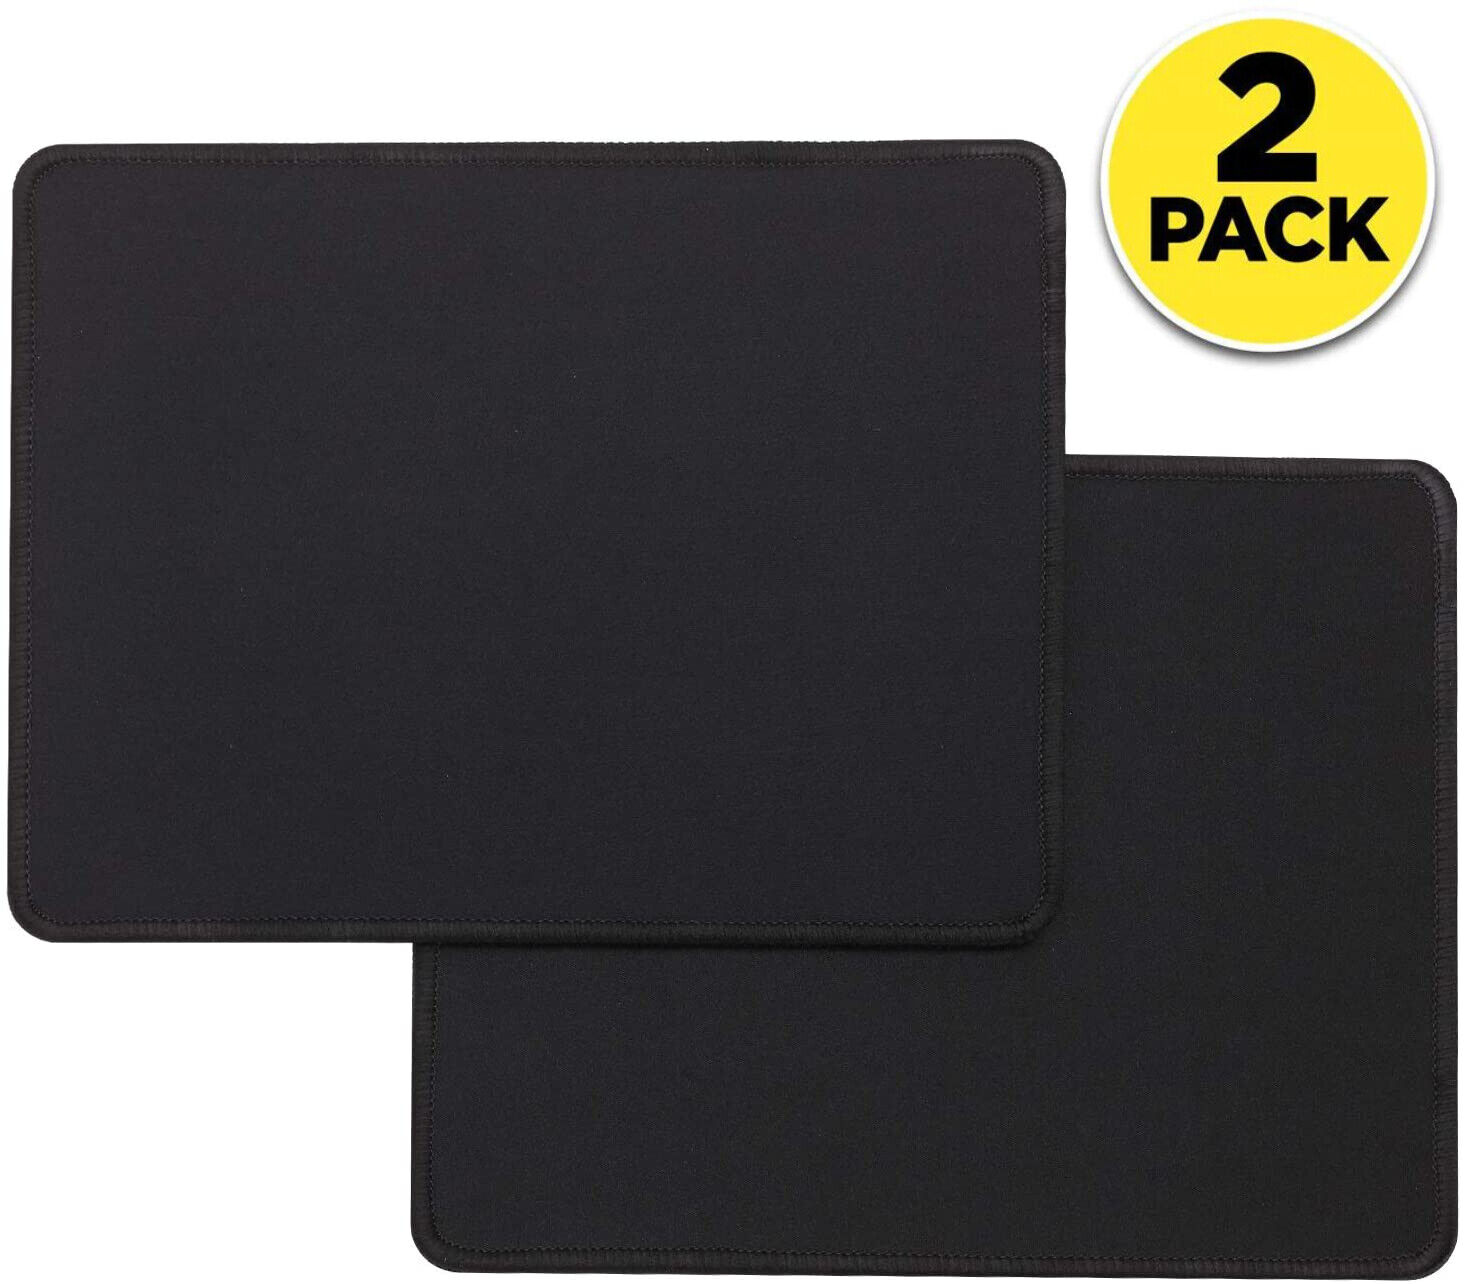 2-Pack Non-Slip Mouse Pad Stitched Edge PC Laptop For Computer PC Gaming Rubber 